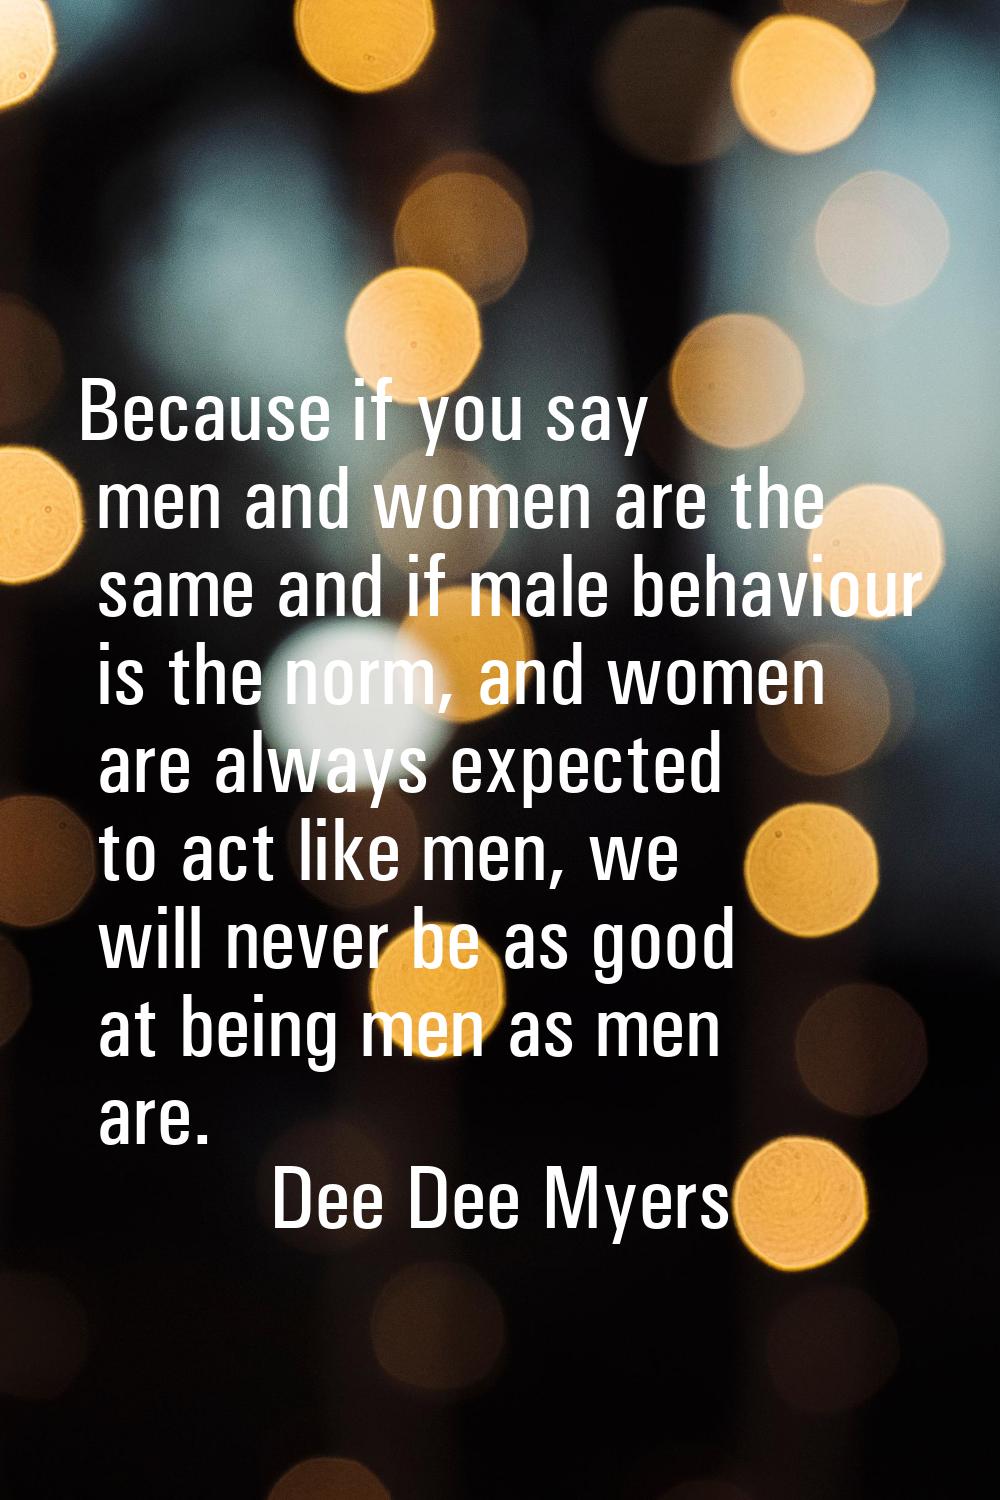 Because if you say men and women are the same and if male behaviour is the norm, and women are alwa